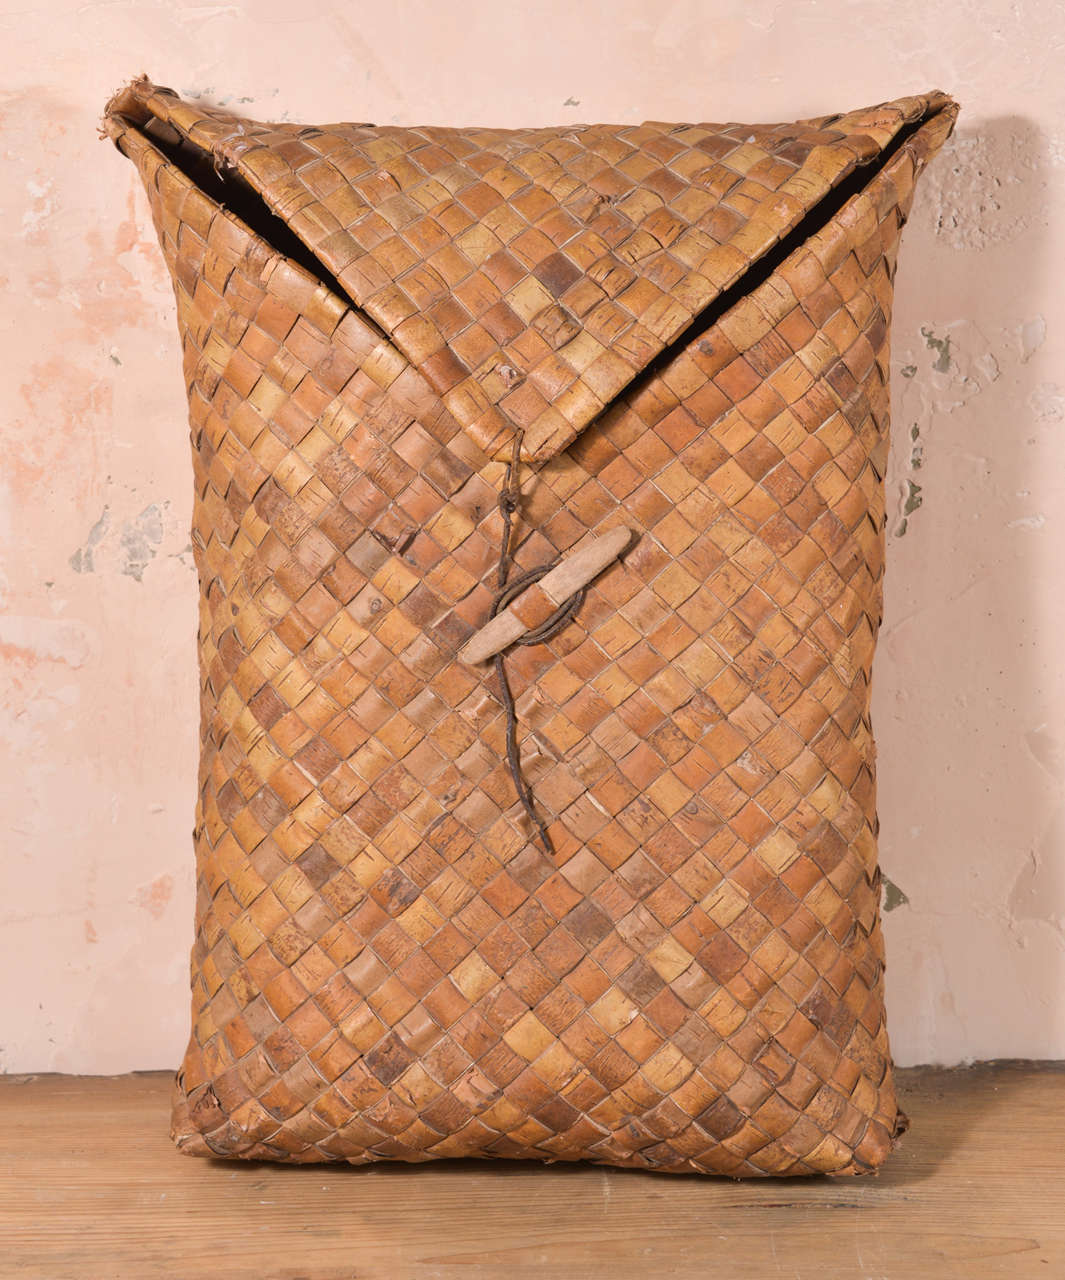 Swedish woven fruit basket: this charming woven construction basket closes with flap secured by leather strap.

Note: Regional differences in humidity and climate during shipping may cause antique and vintage wood to shrink and/or split along its